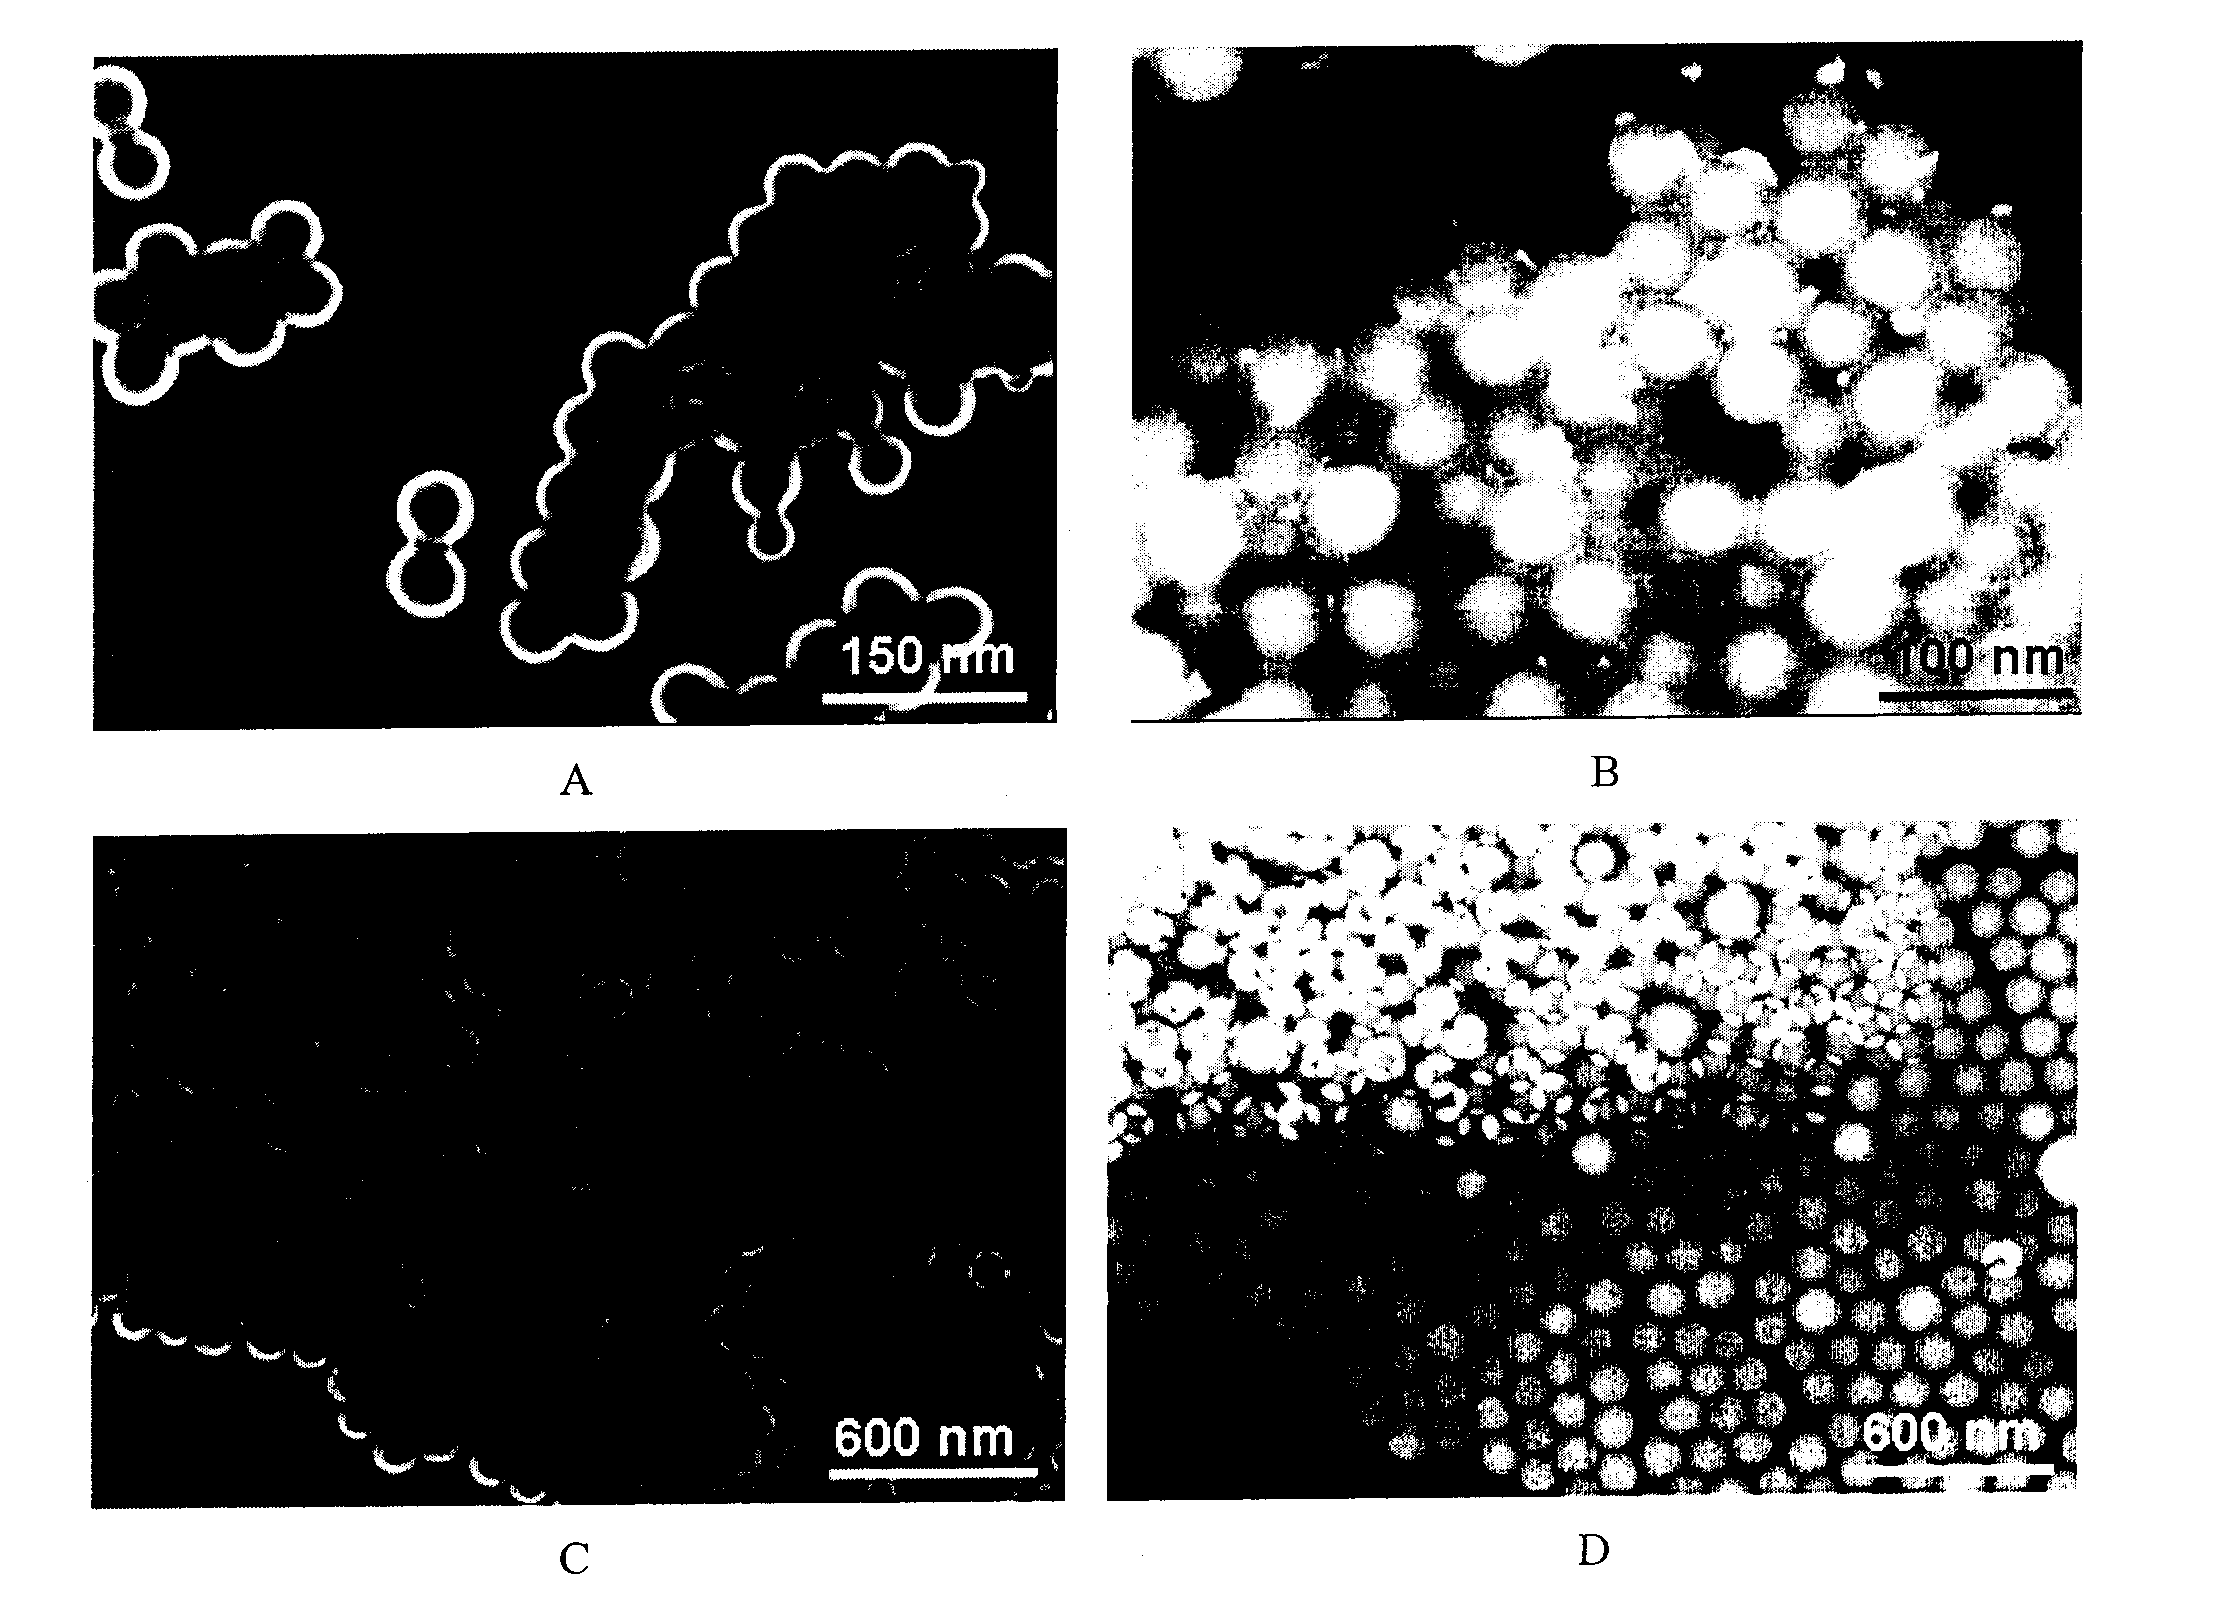 Particles containing detectable elemental code